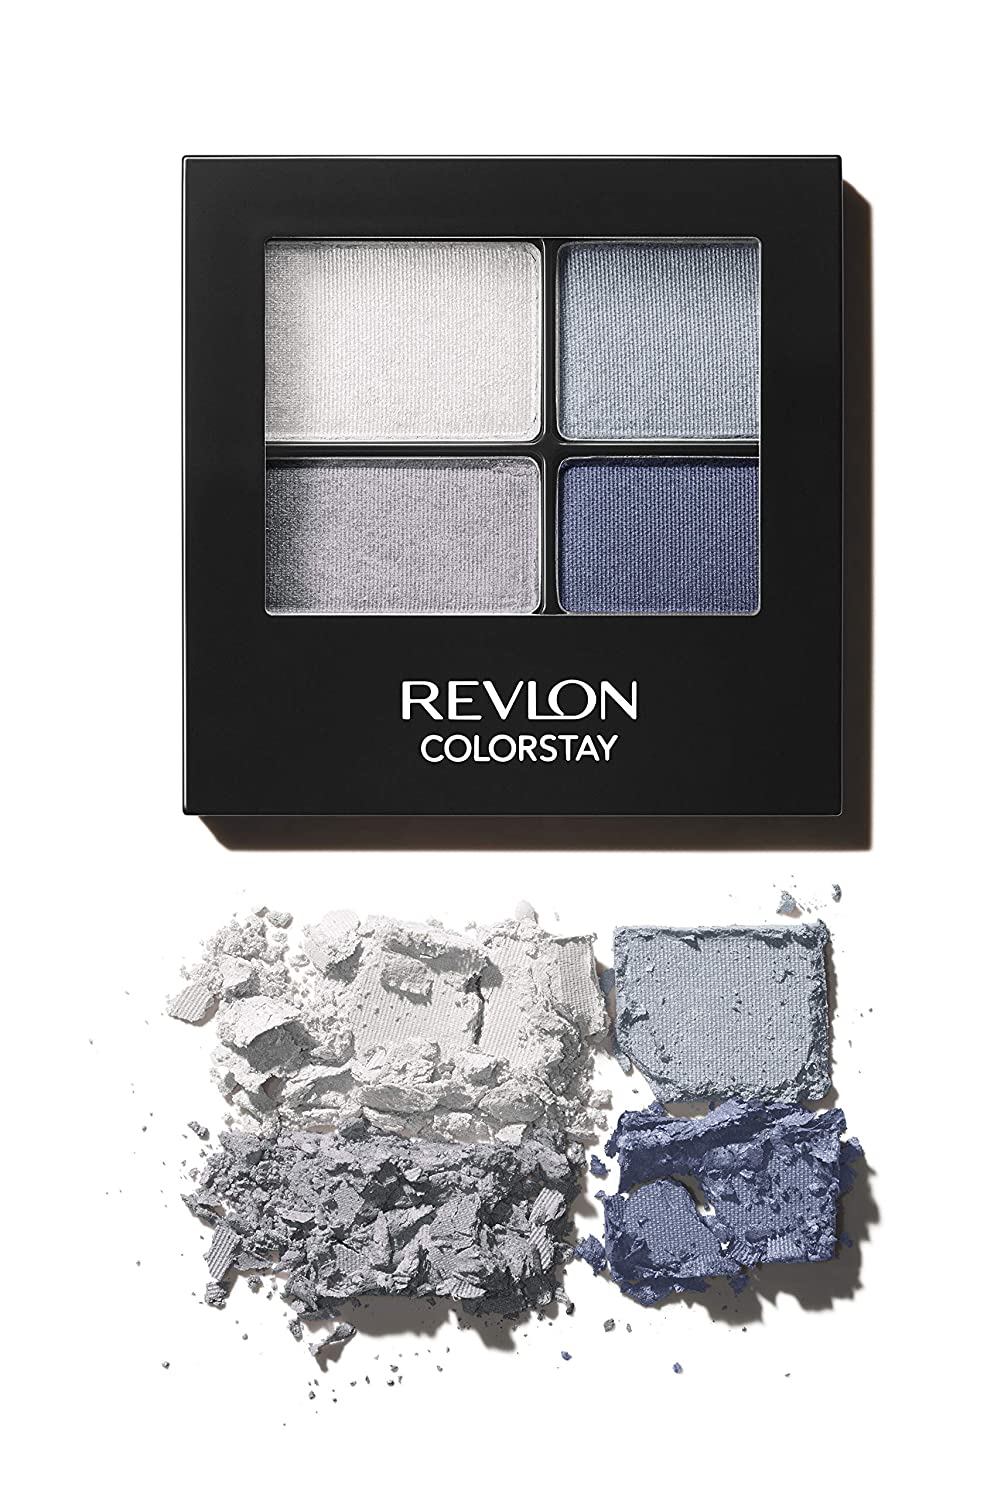 Revlon ColorStay 16 Hour Eyeshadow Quad w/ Applicator (Passionate) $1.55 w/ S&S + Free Shipping w/ Prime or $25+